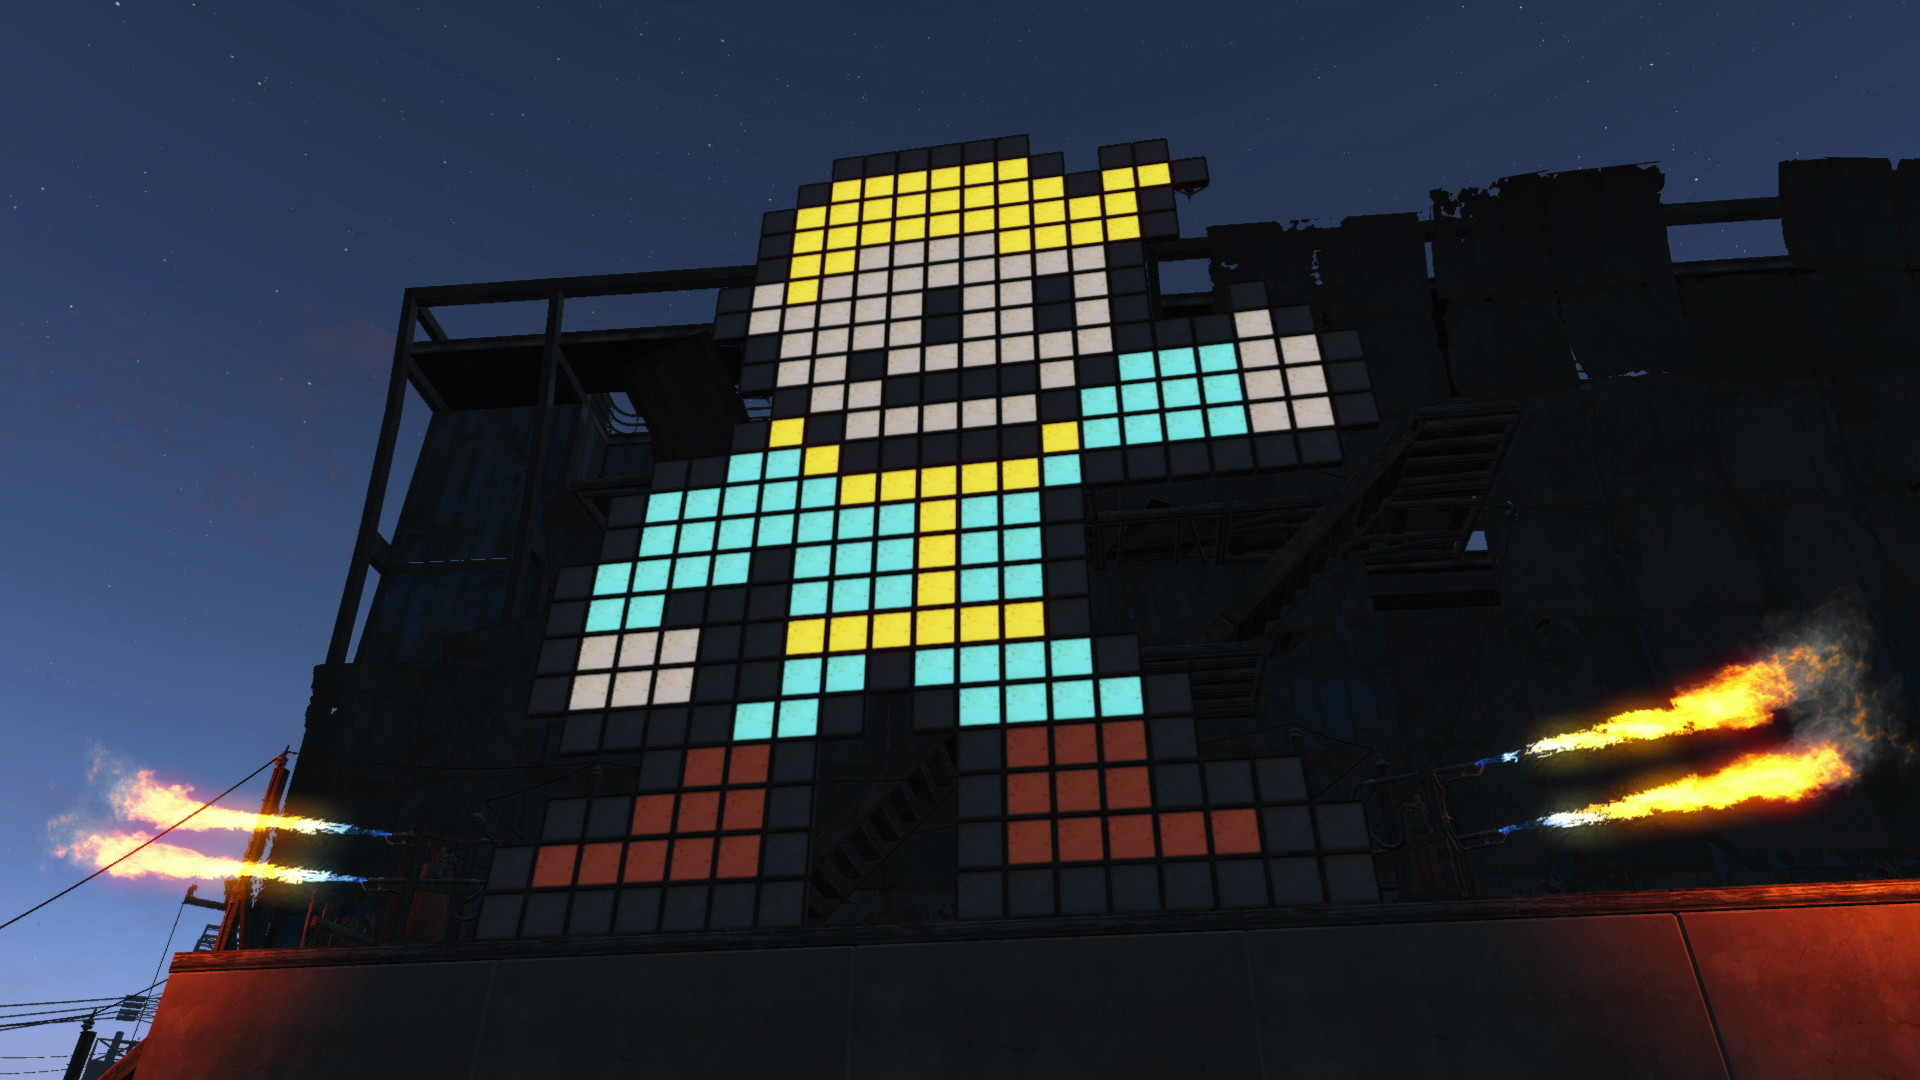 Fallout 4 Ships 12 Million Copies on Launch Day